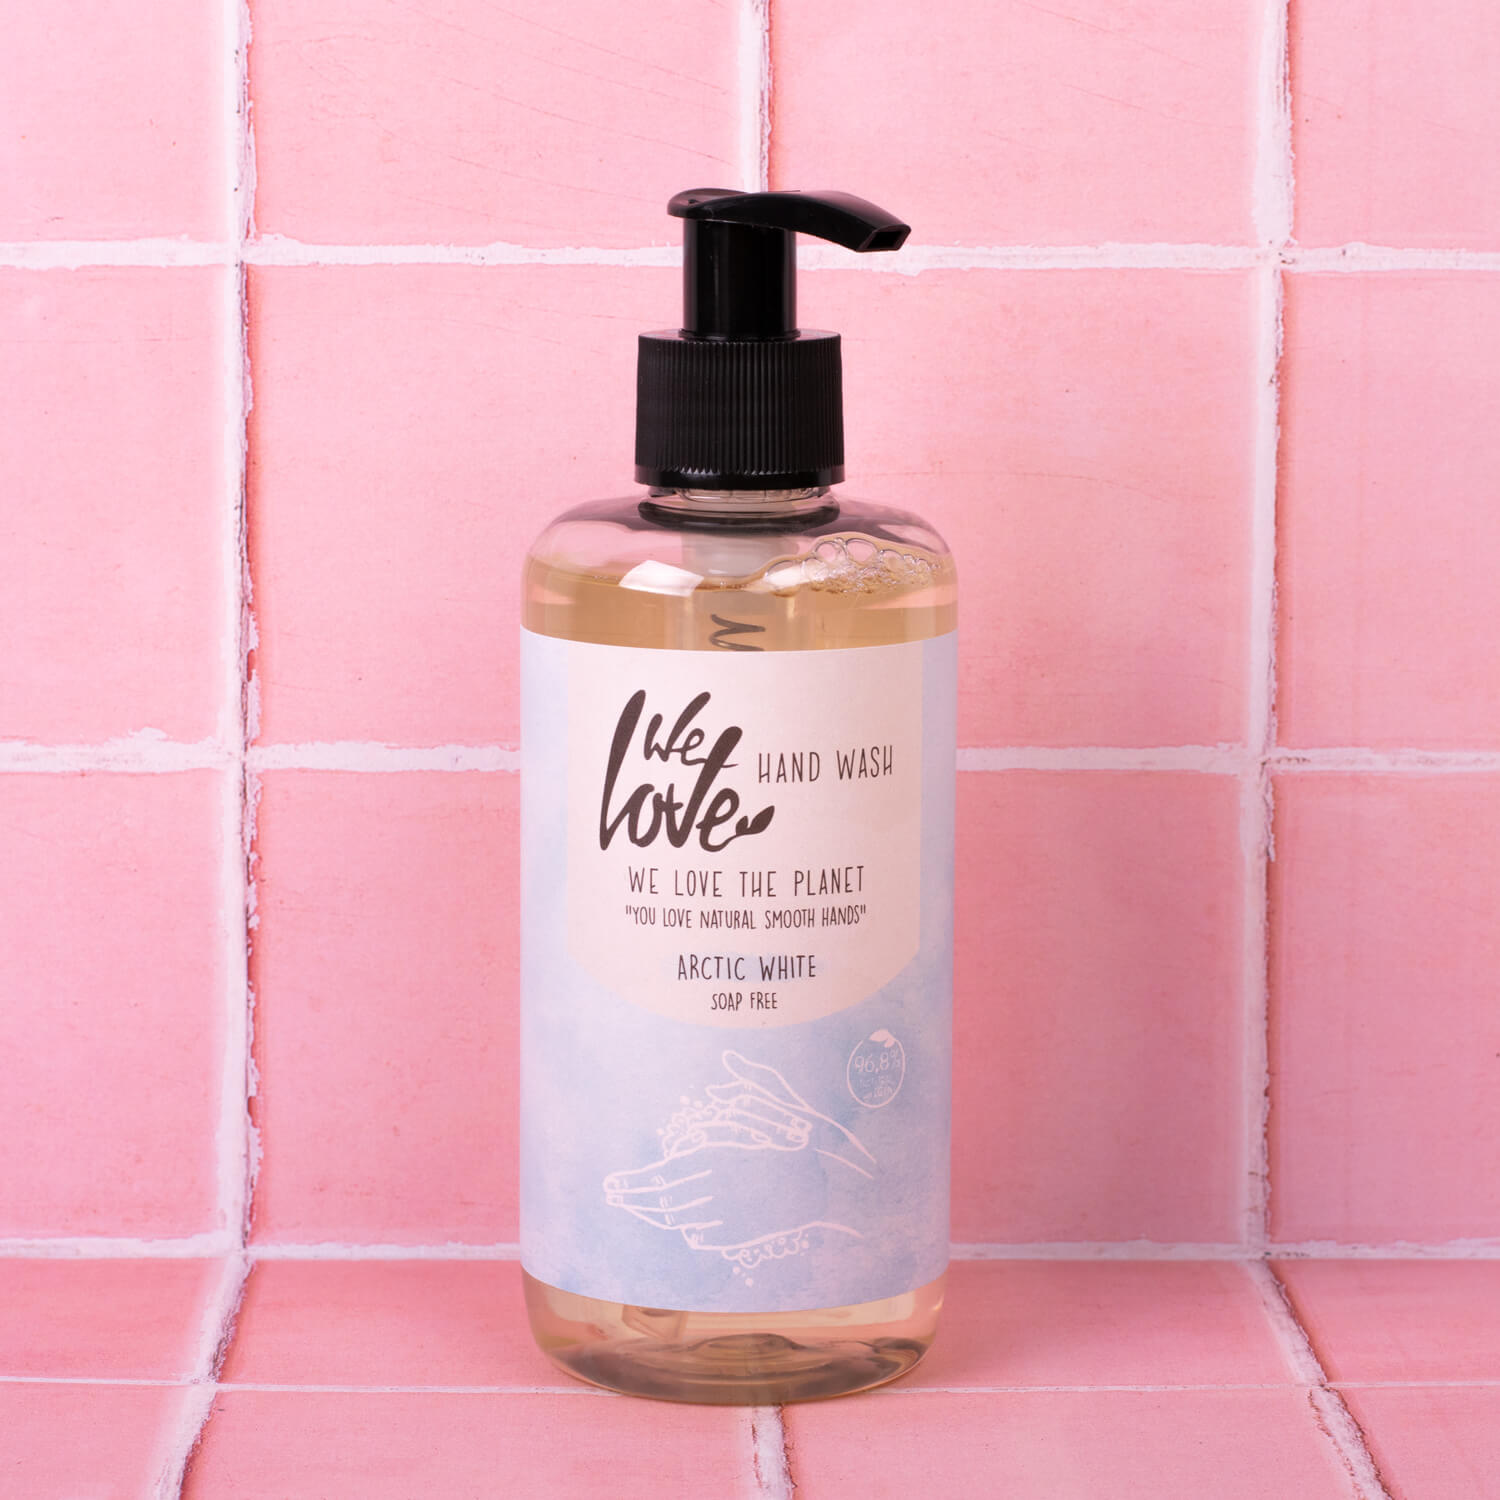 We Love The Planet Arctic White soap in pink bathroom